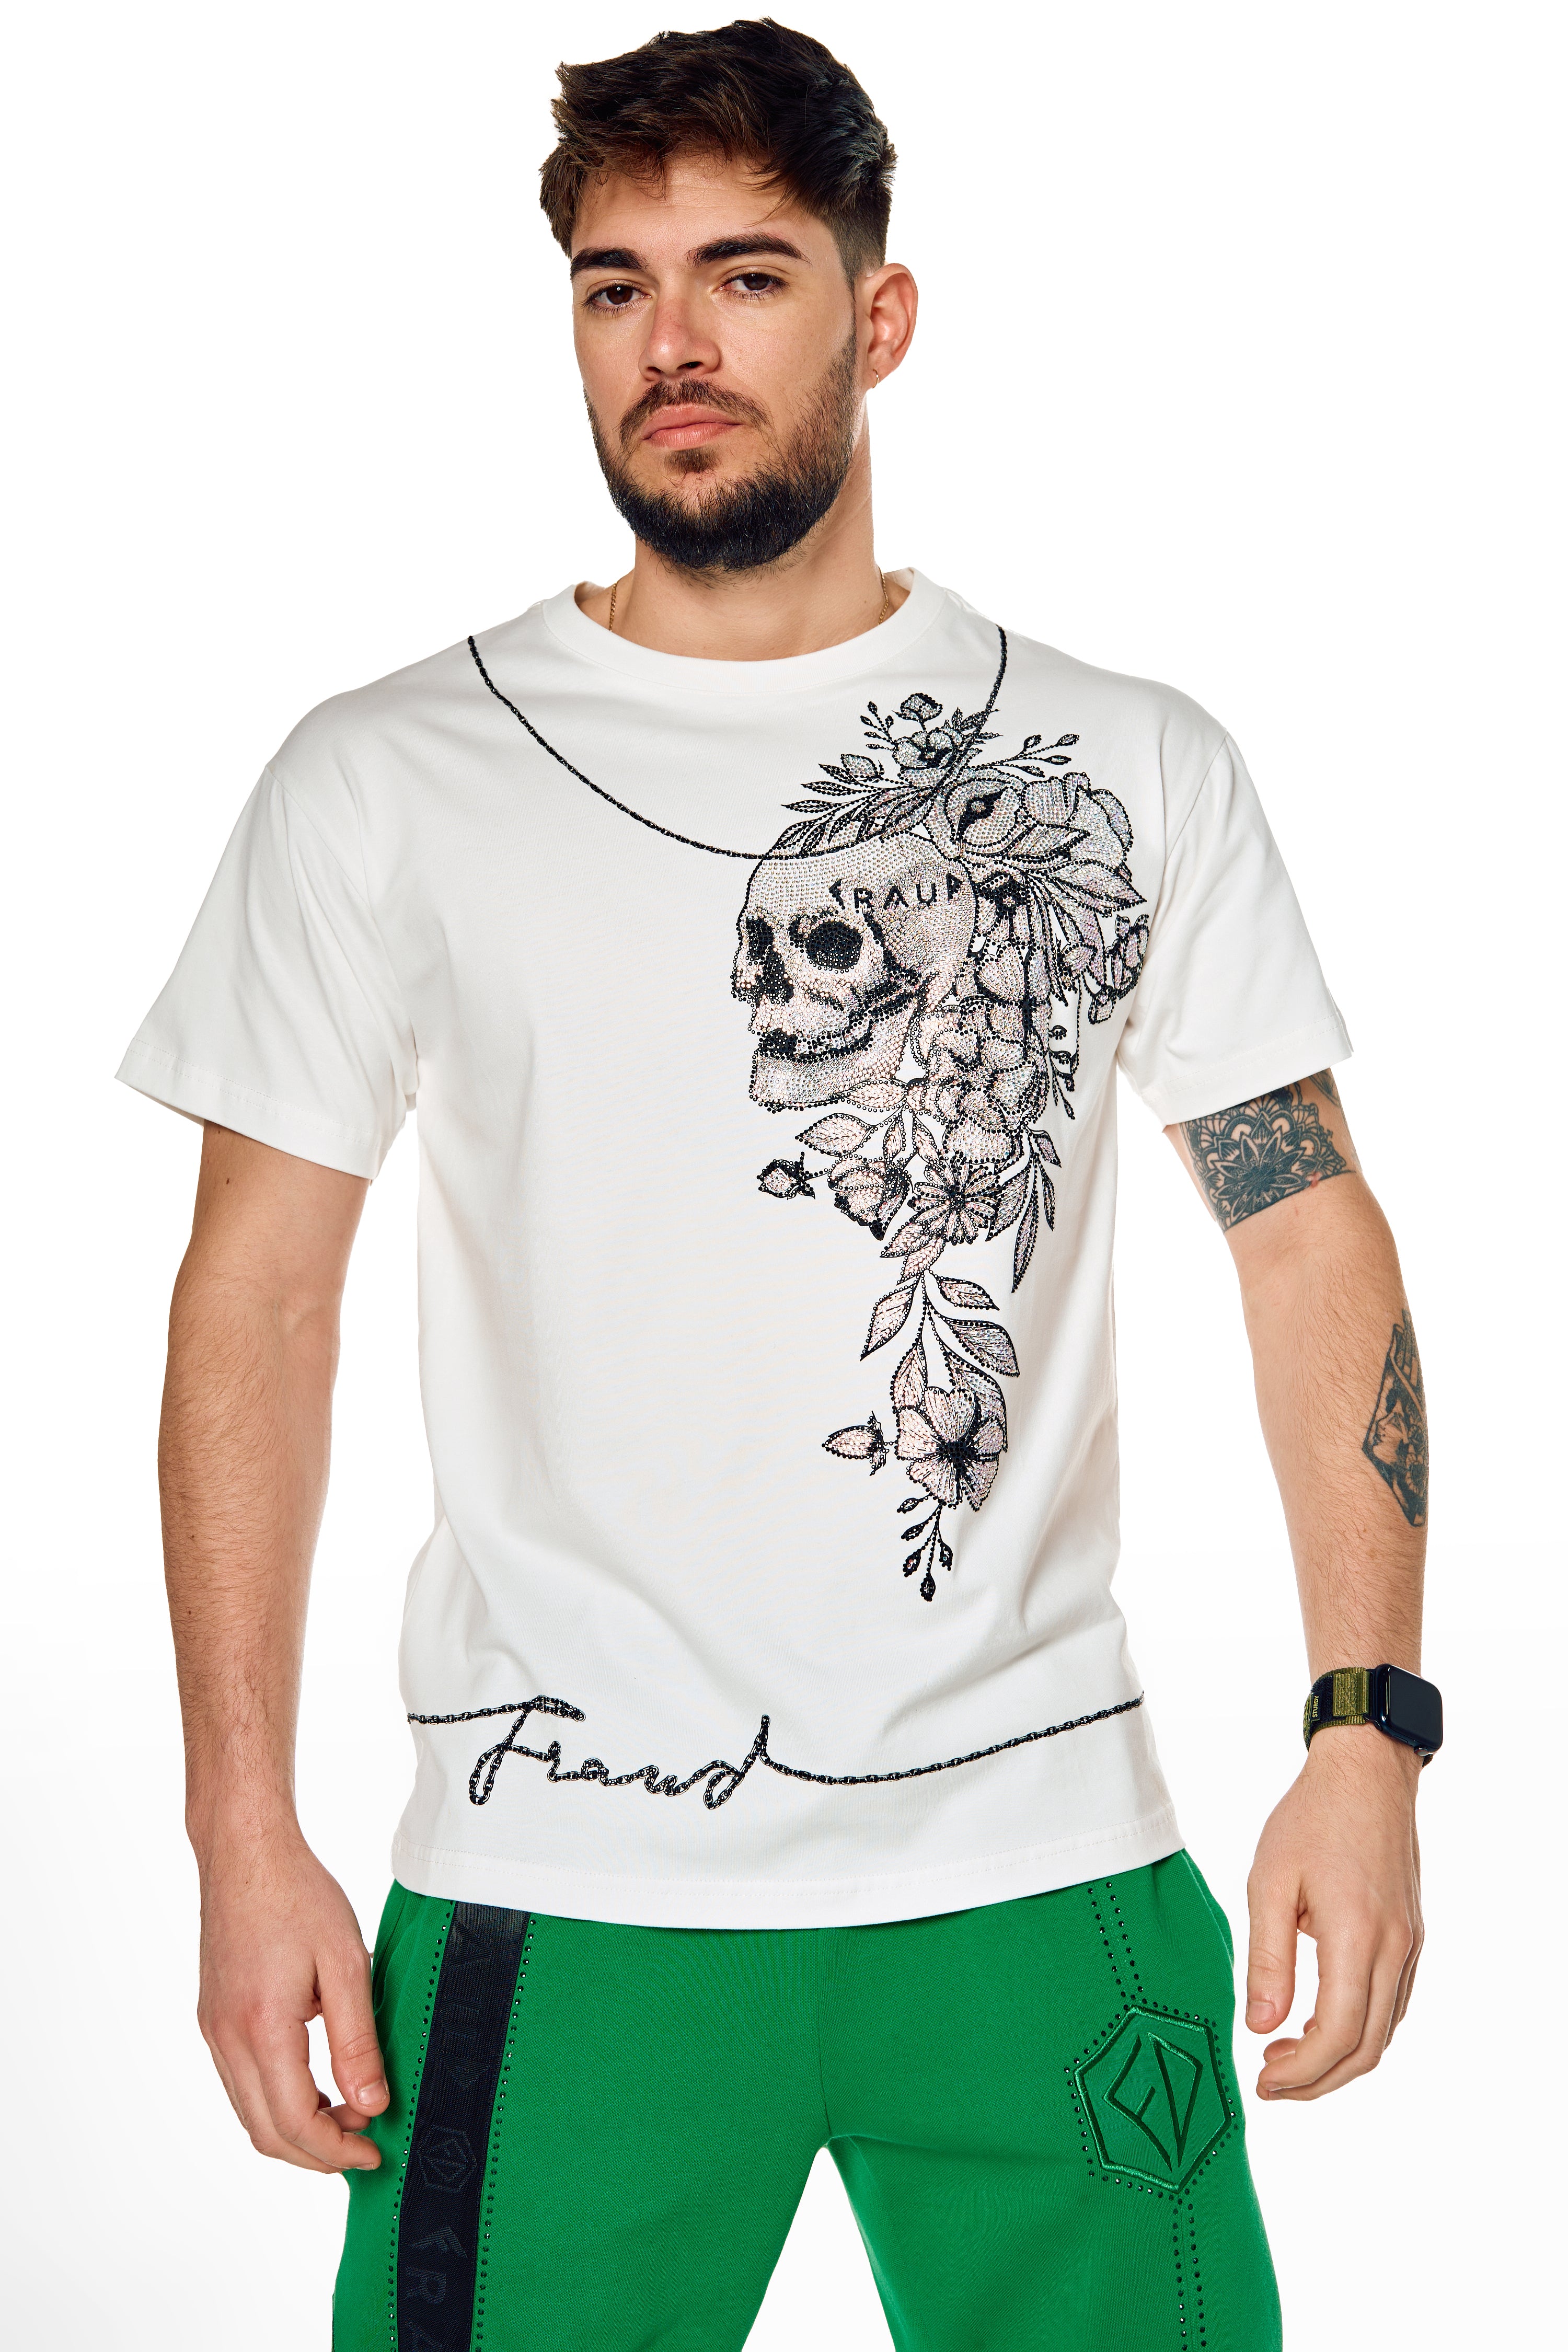 White t-shirt with crystals,sculp